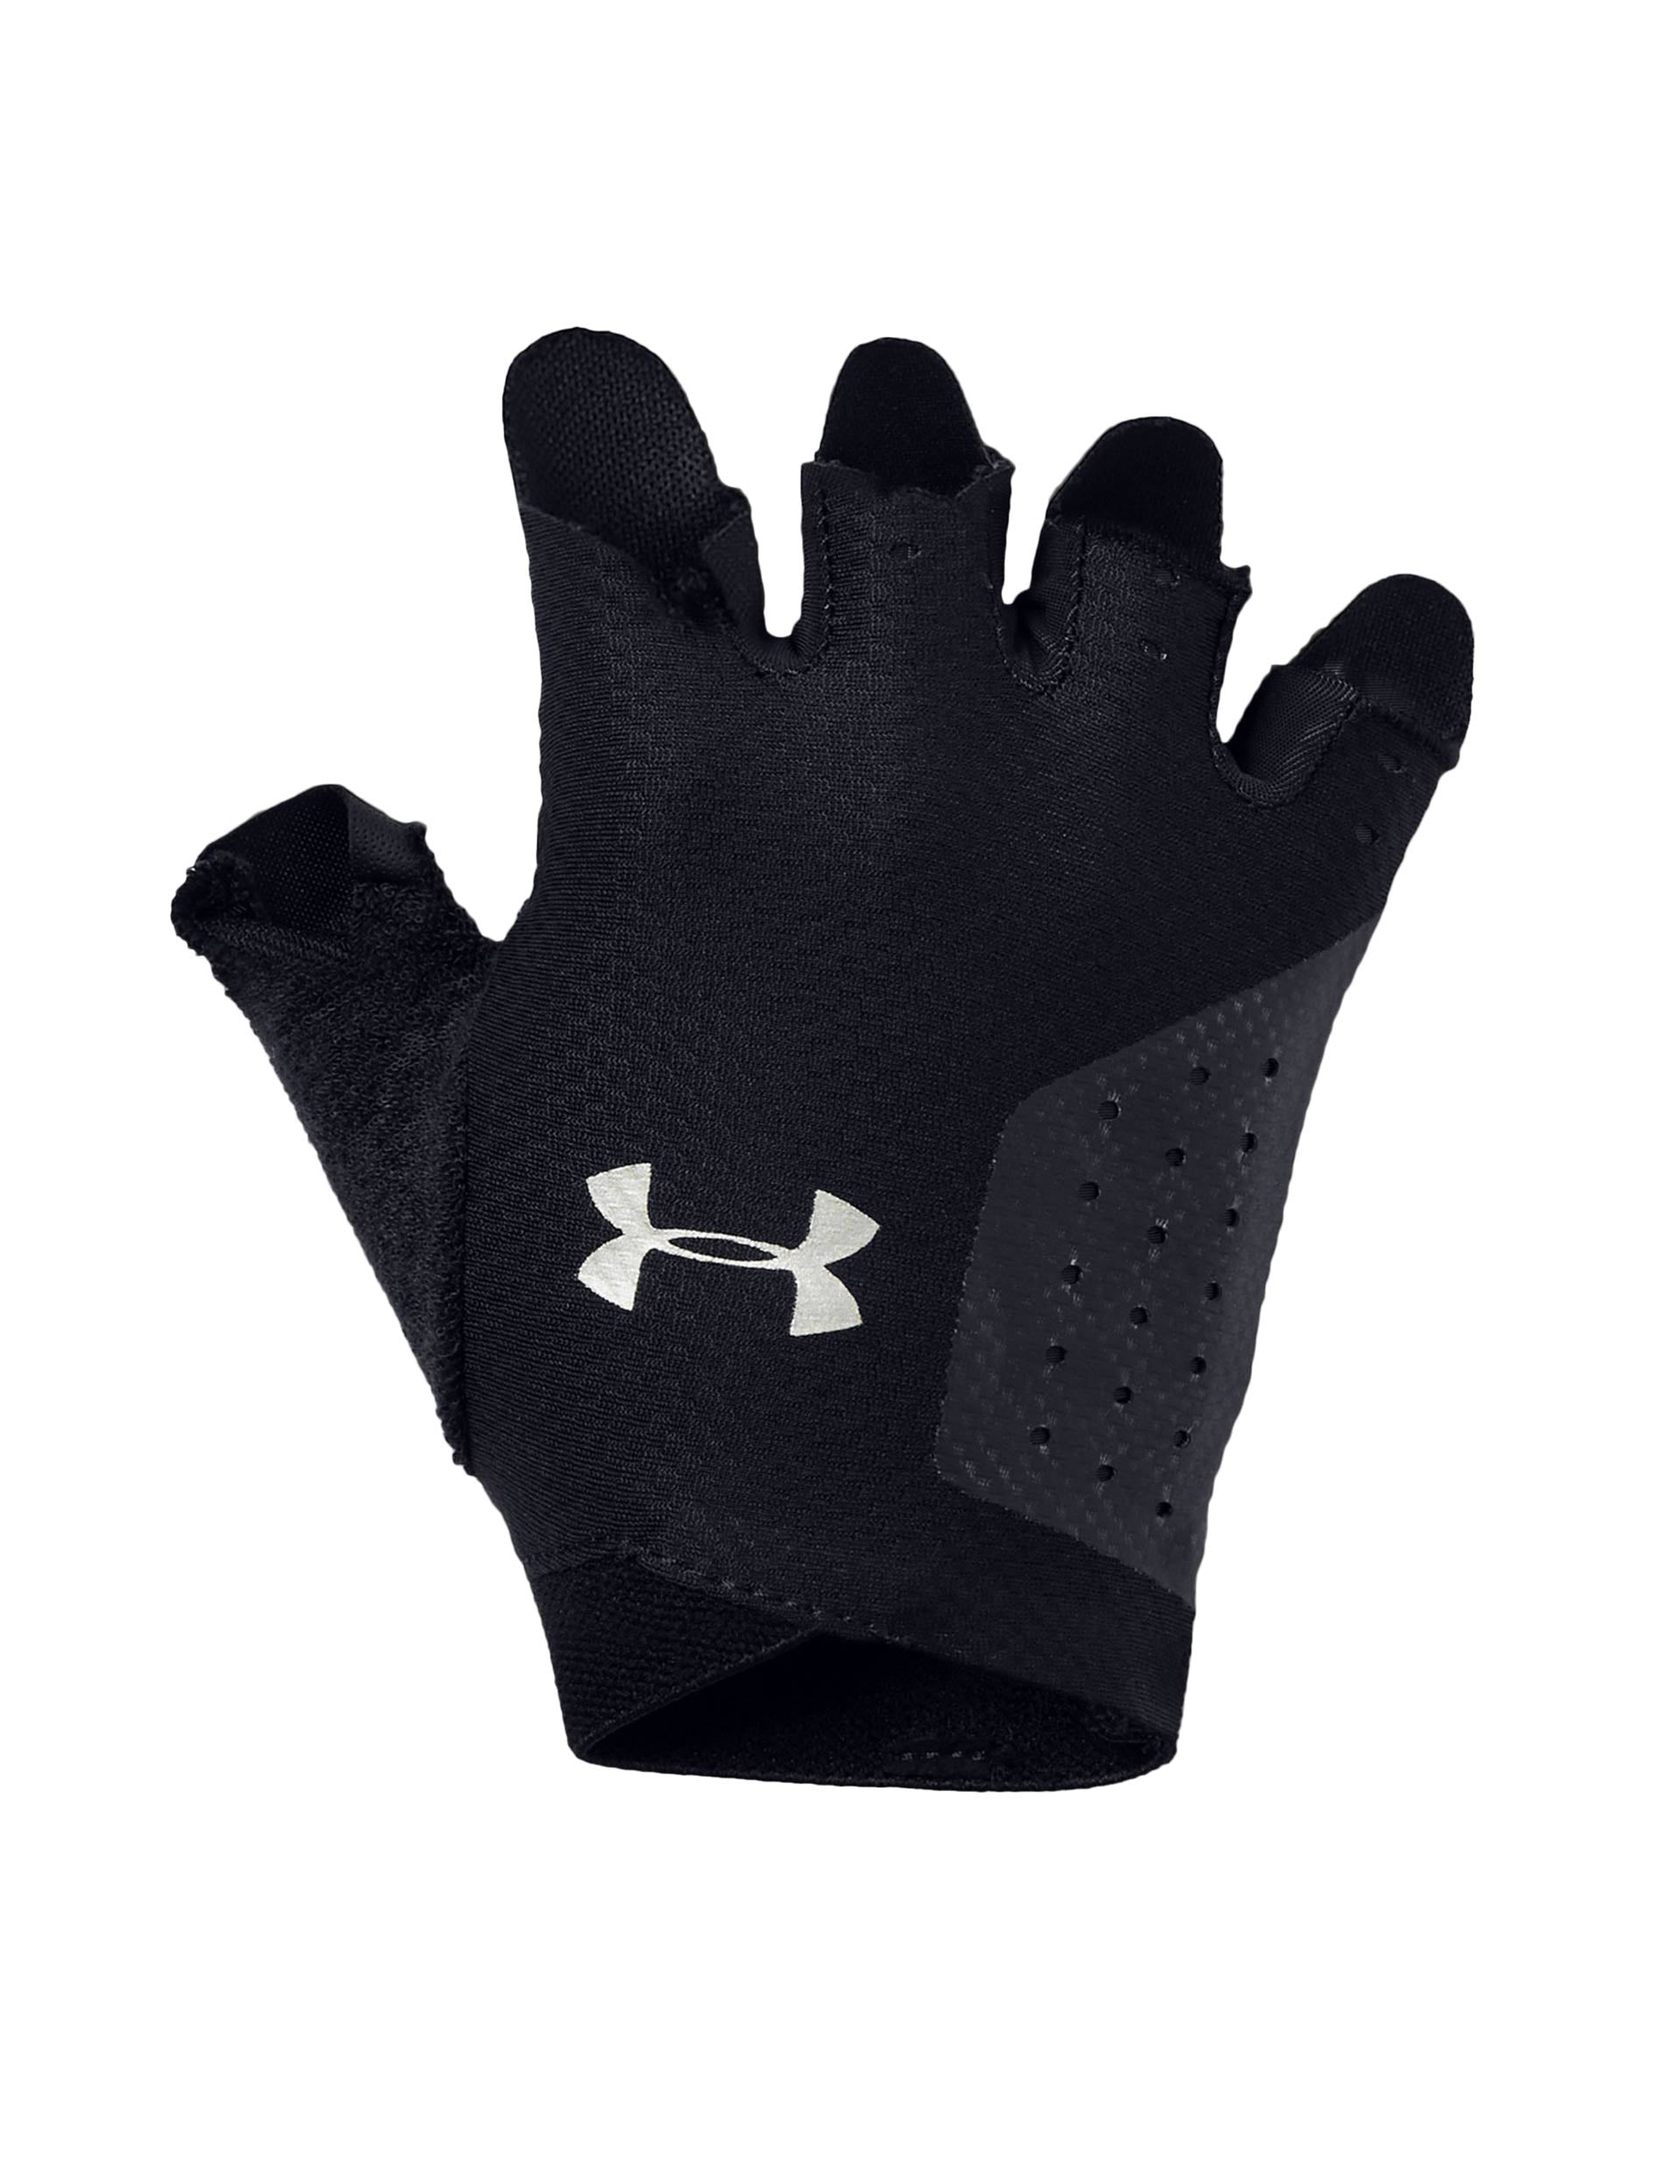 Under Armour Light Training Gloves - Black/Silverimage1- The Sports Edit